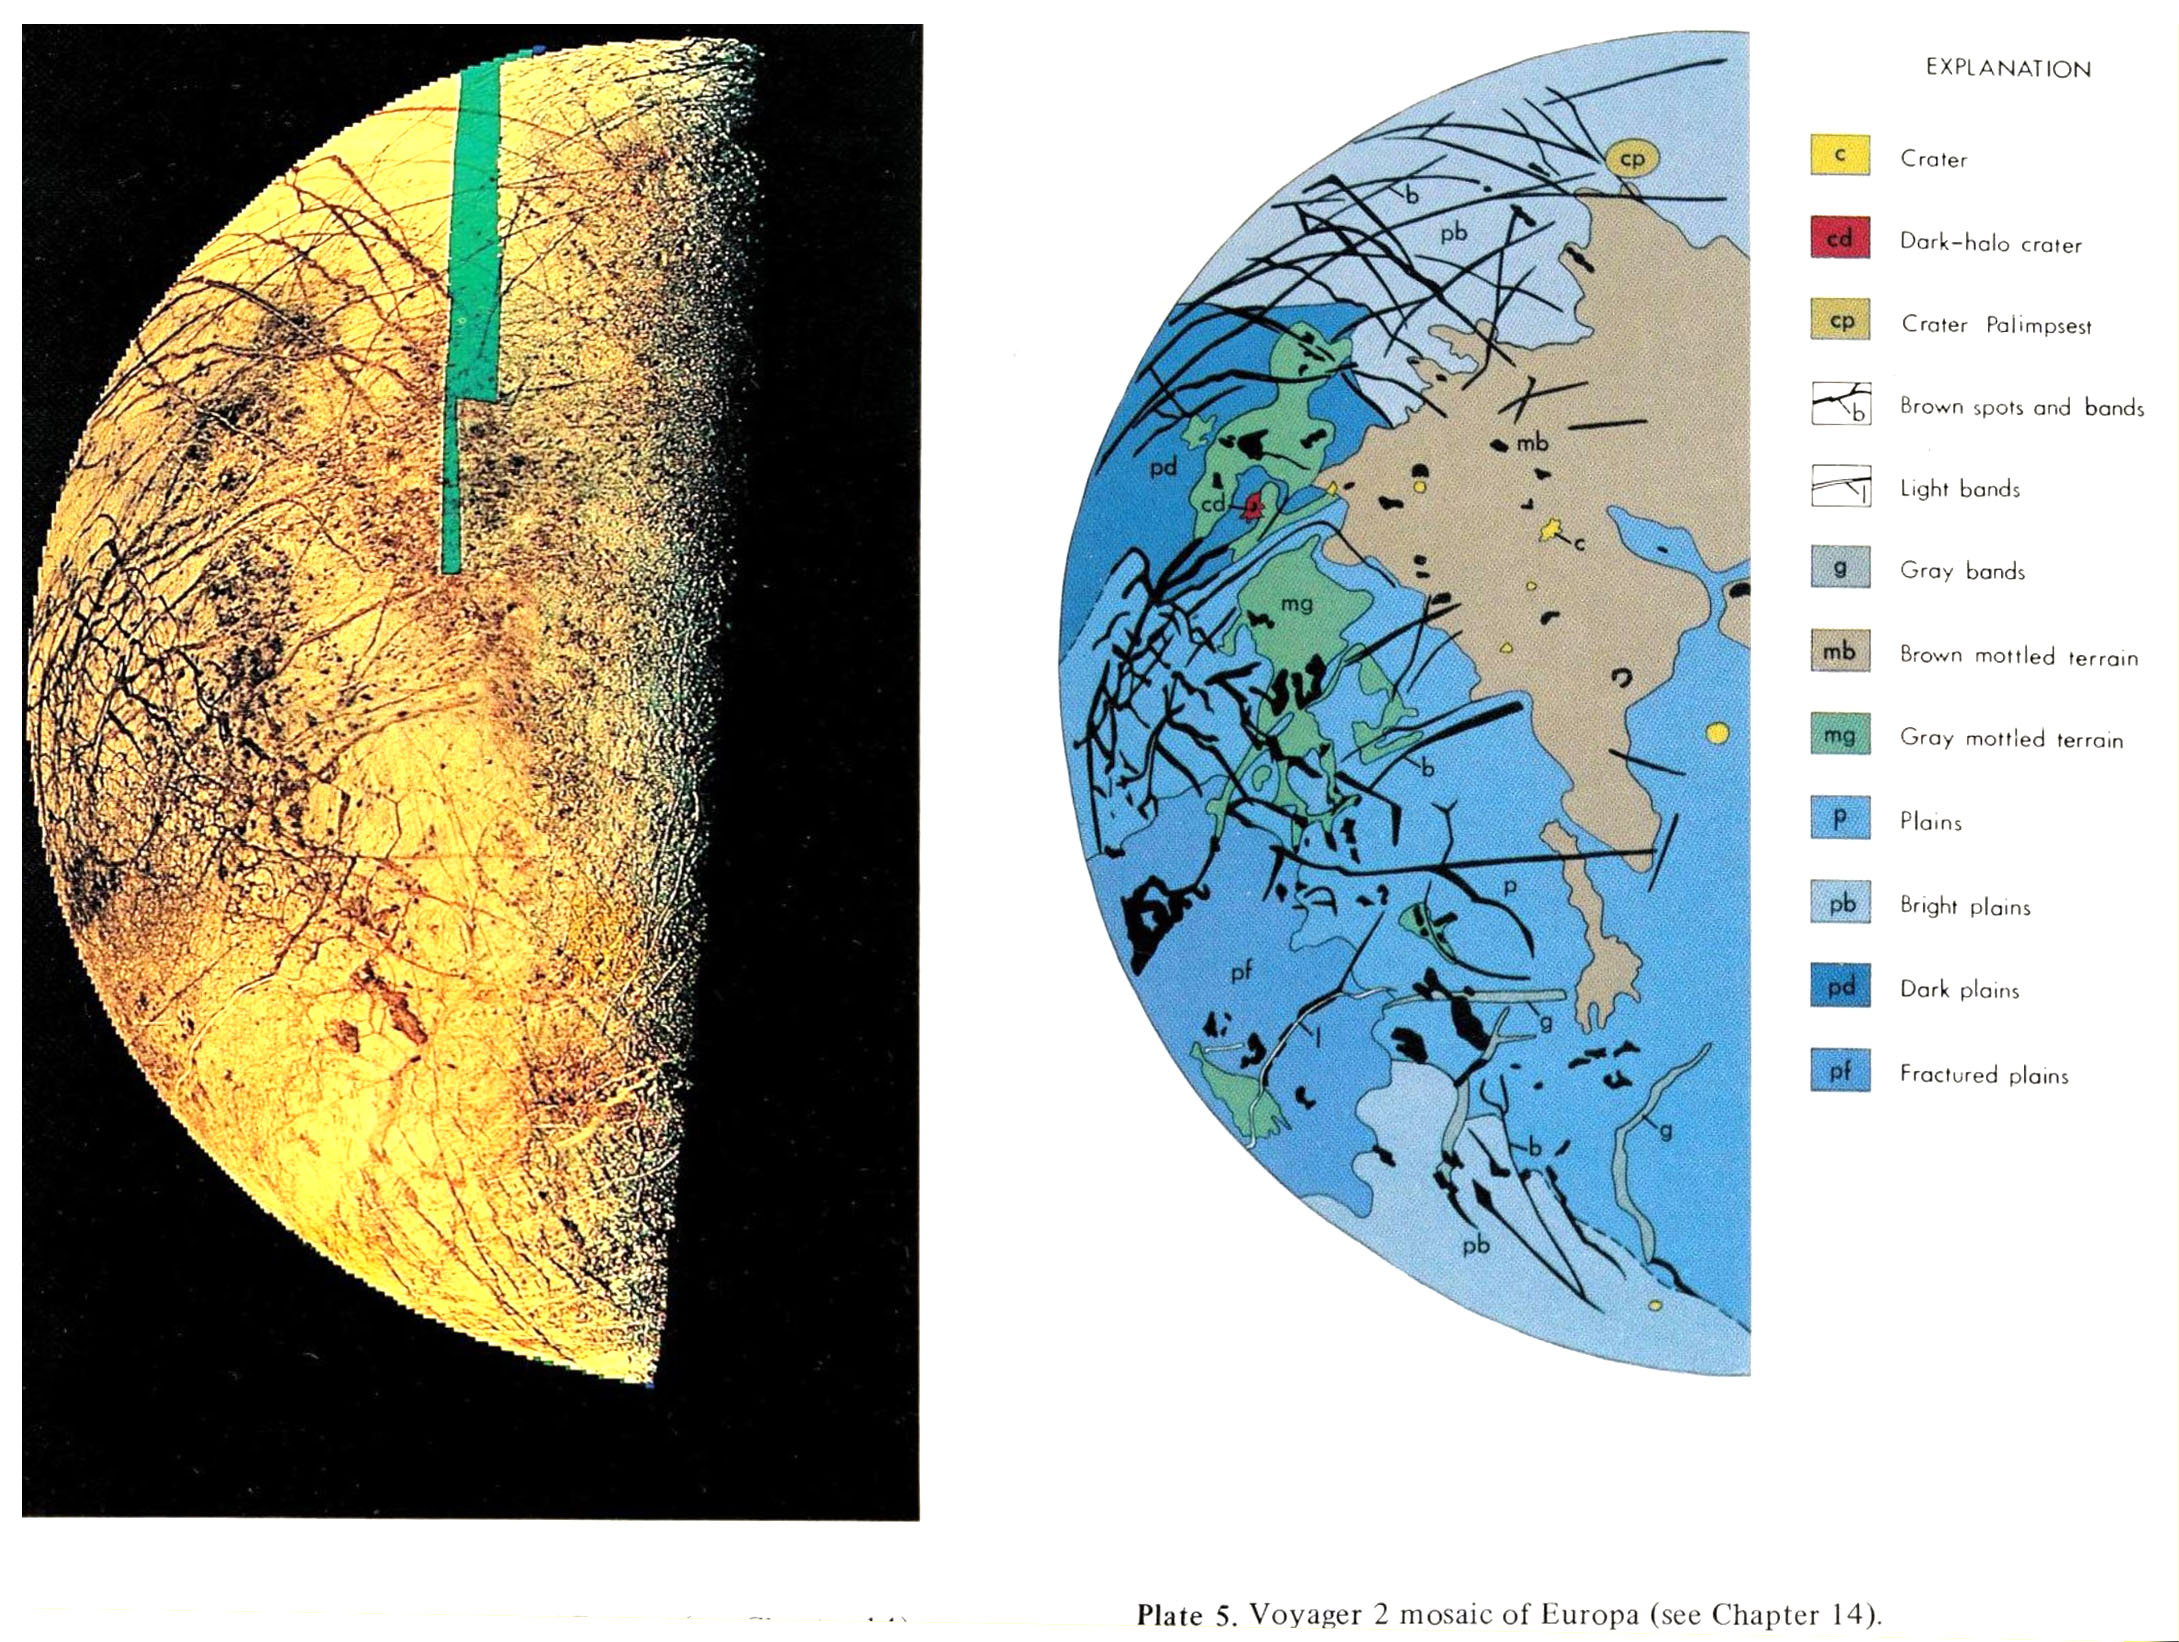 The first geologic map of Europa